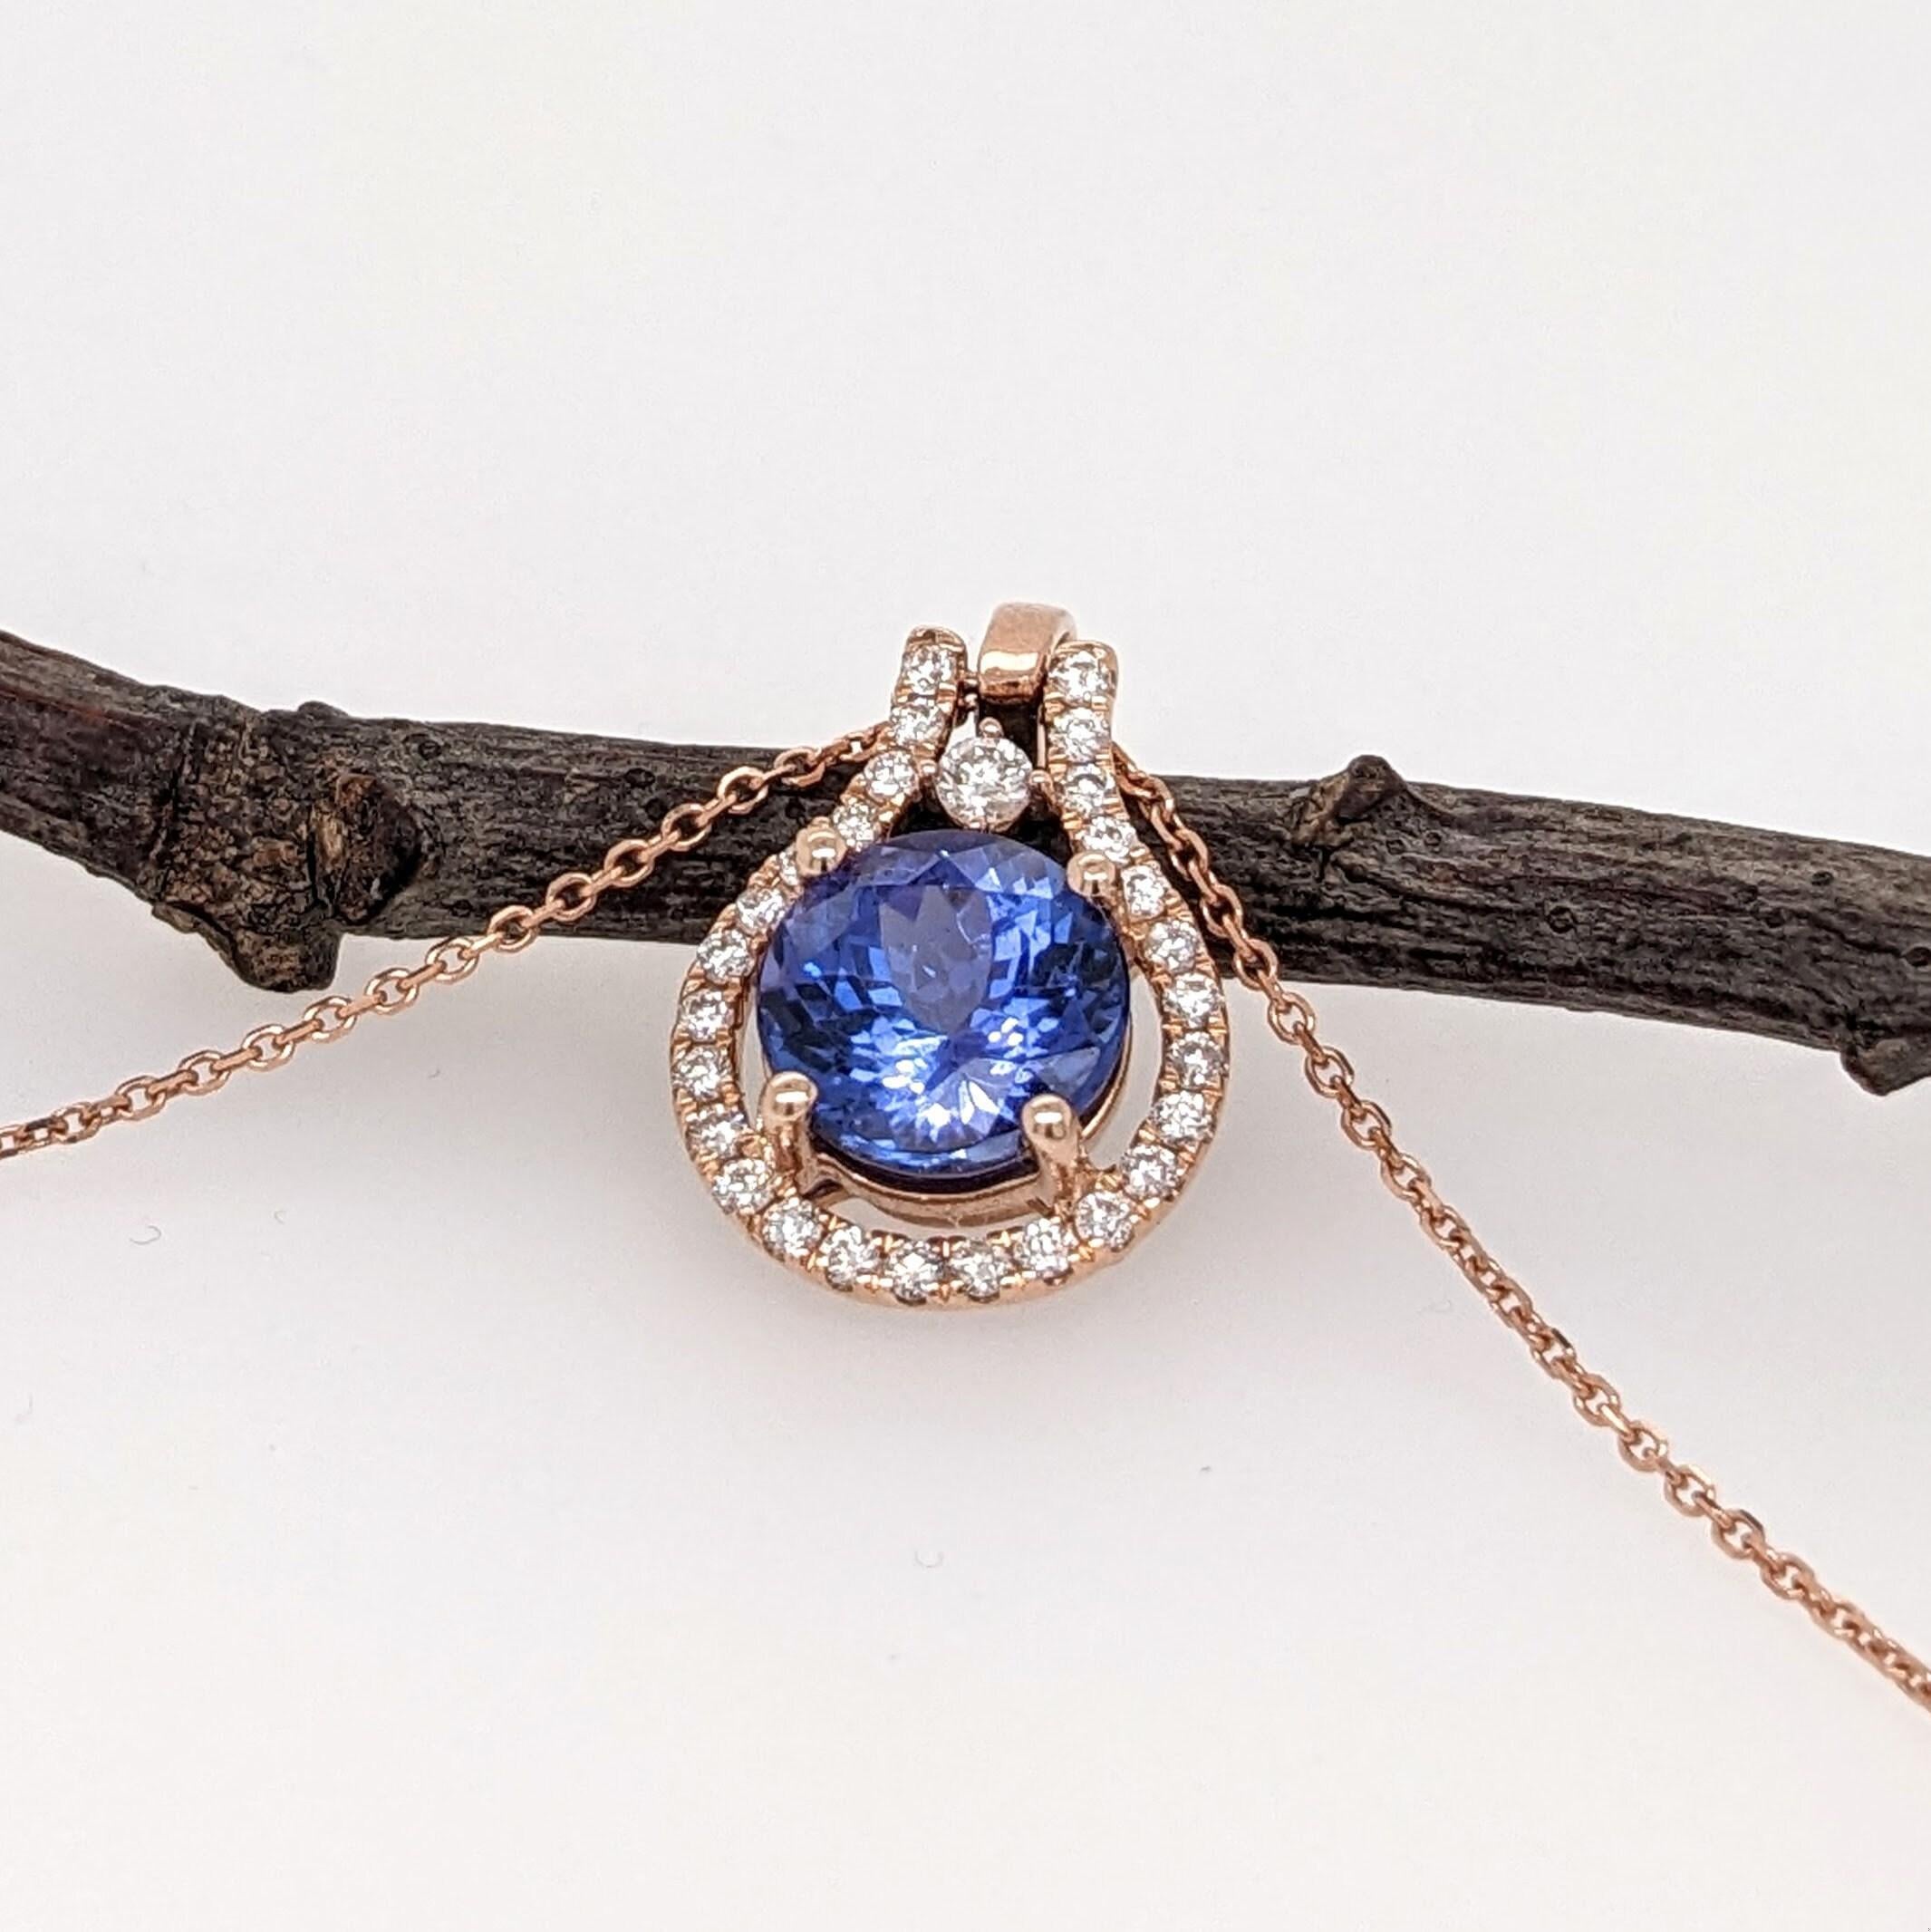 1.6ct Tanzanite Pendant w Earth Mined Diamonds in Solid 14K Rose Gold Round 8mm 1